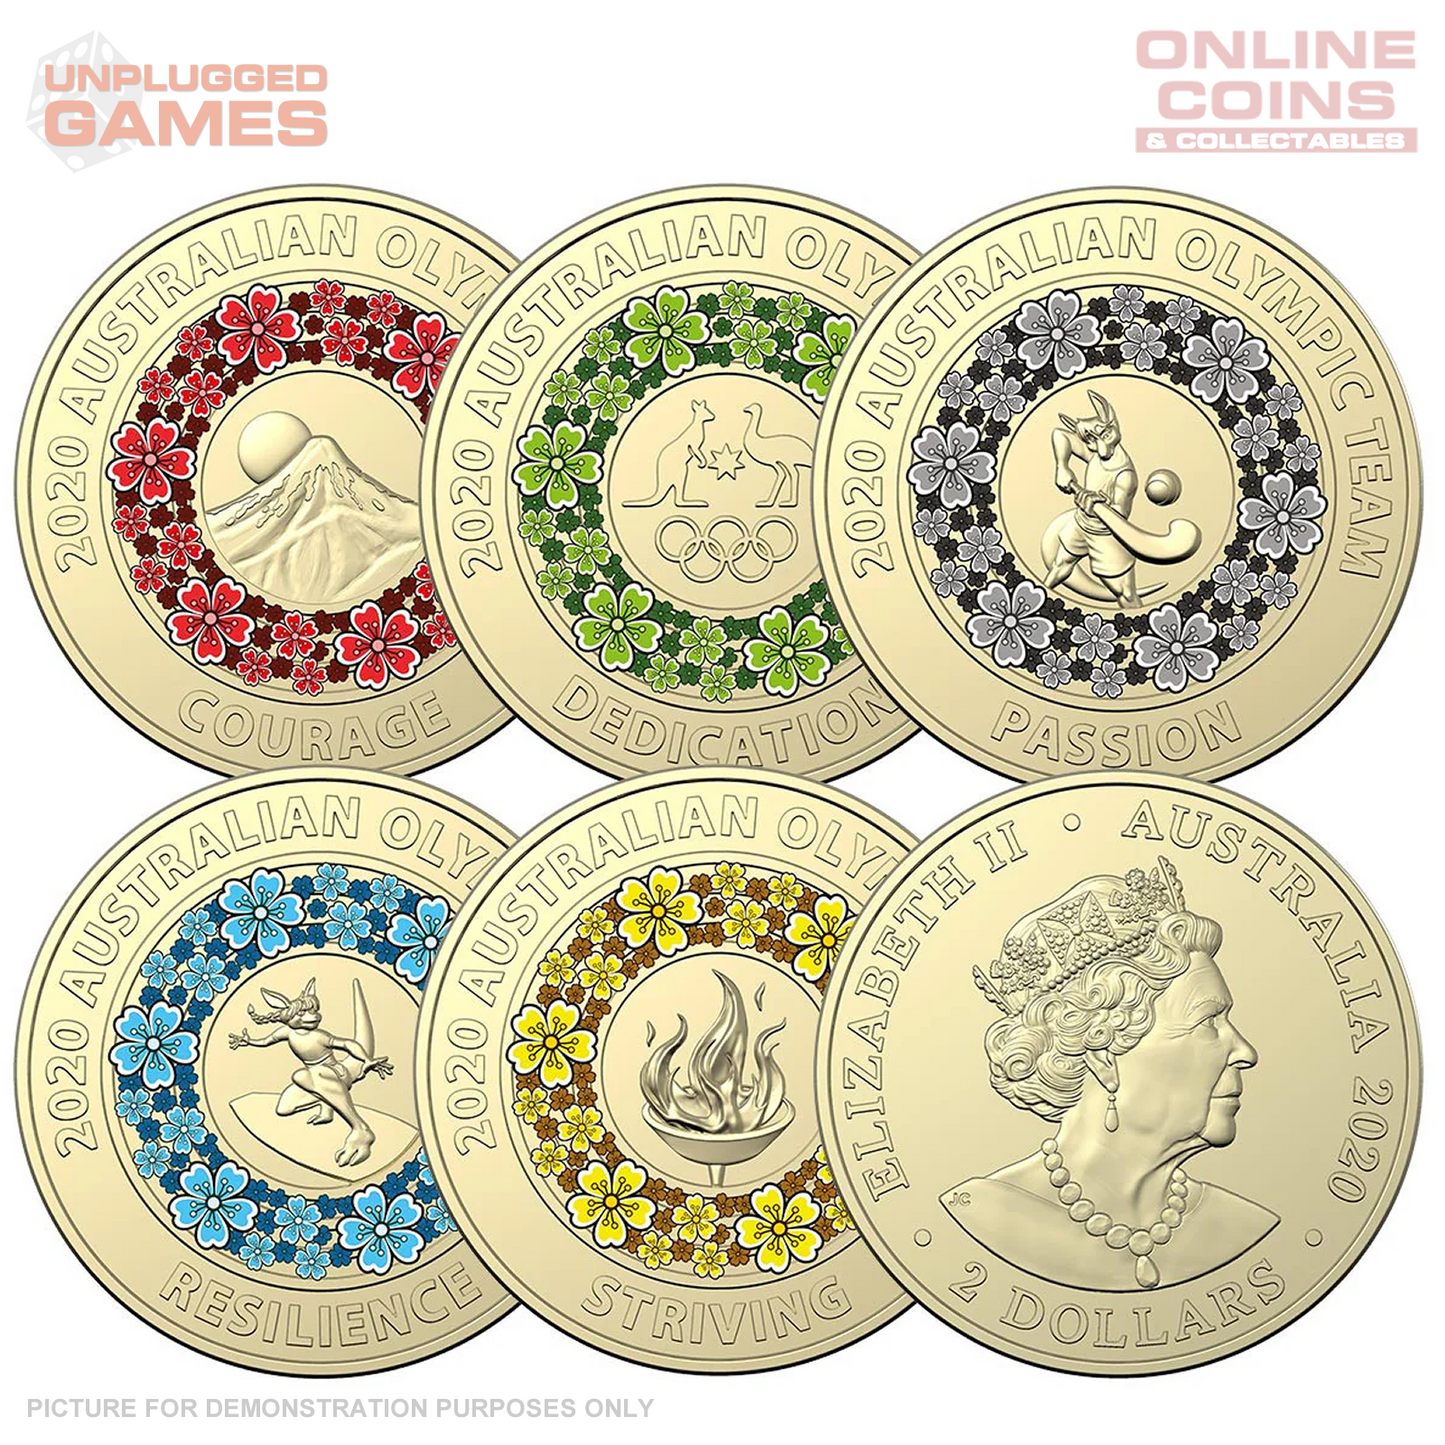 2020 Tokyo Olympic Games Uncirculated $2 Coloured 5 Coin Set